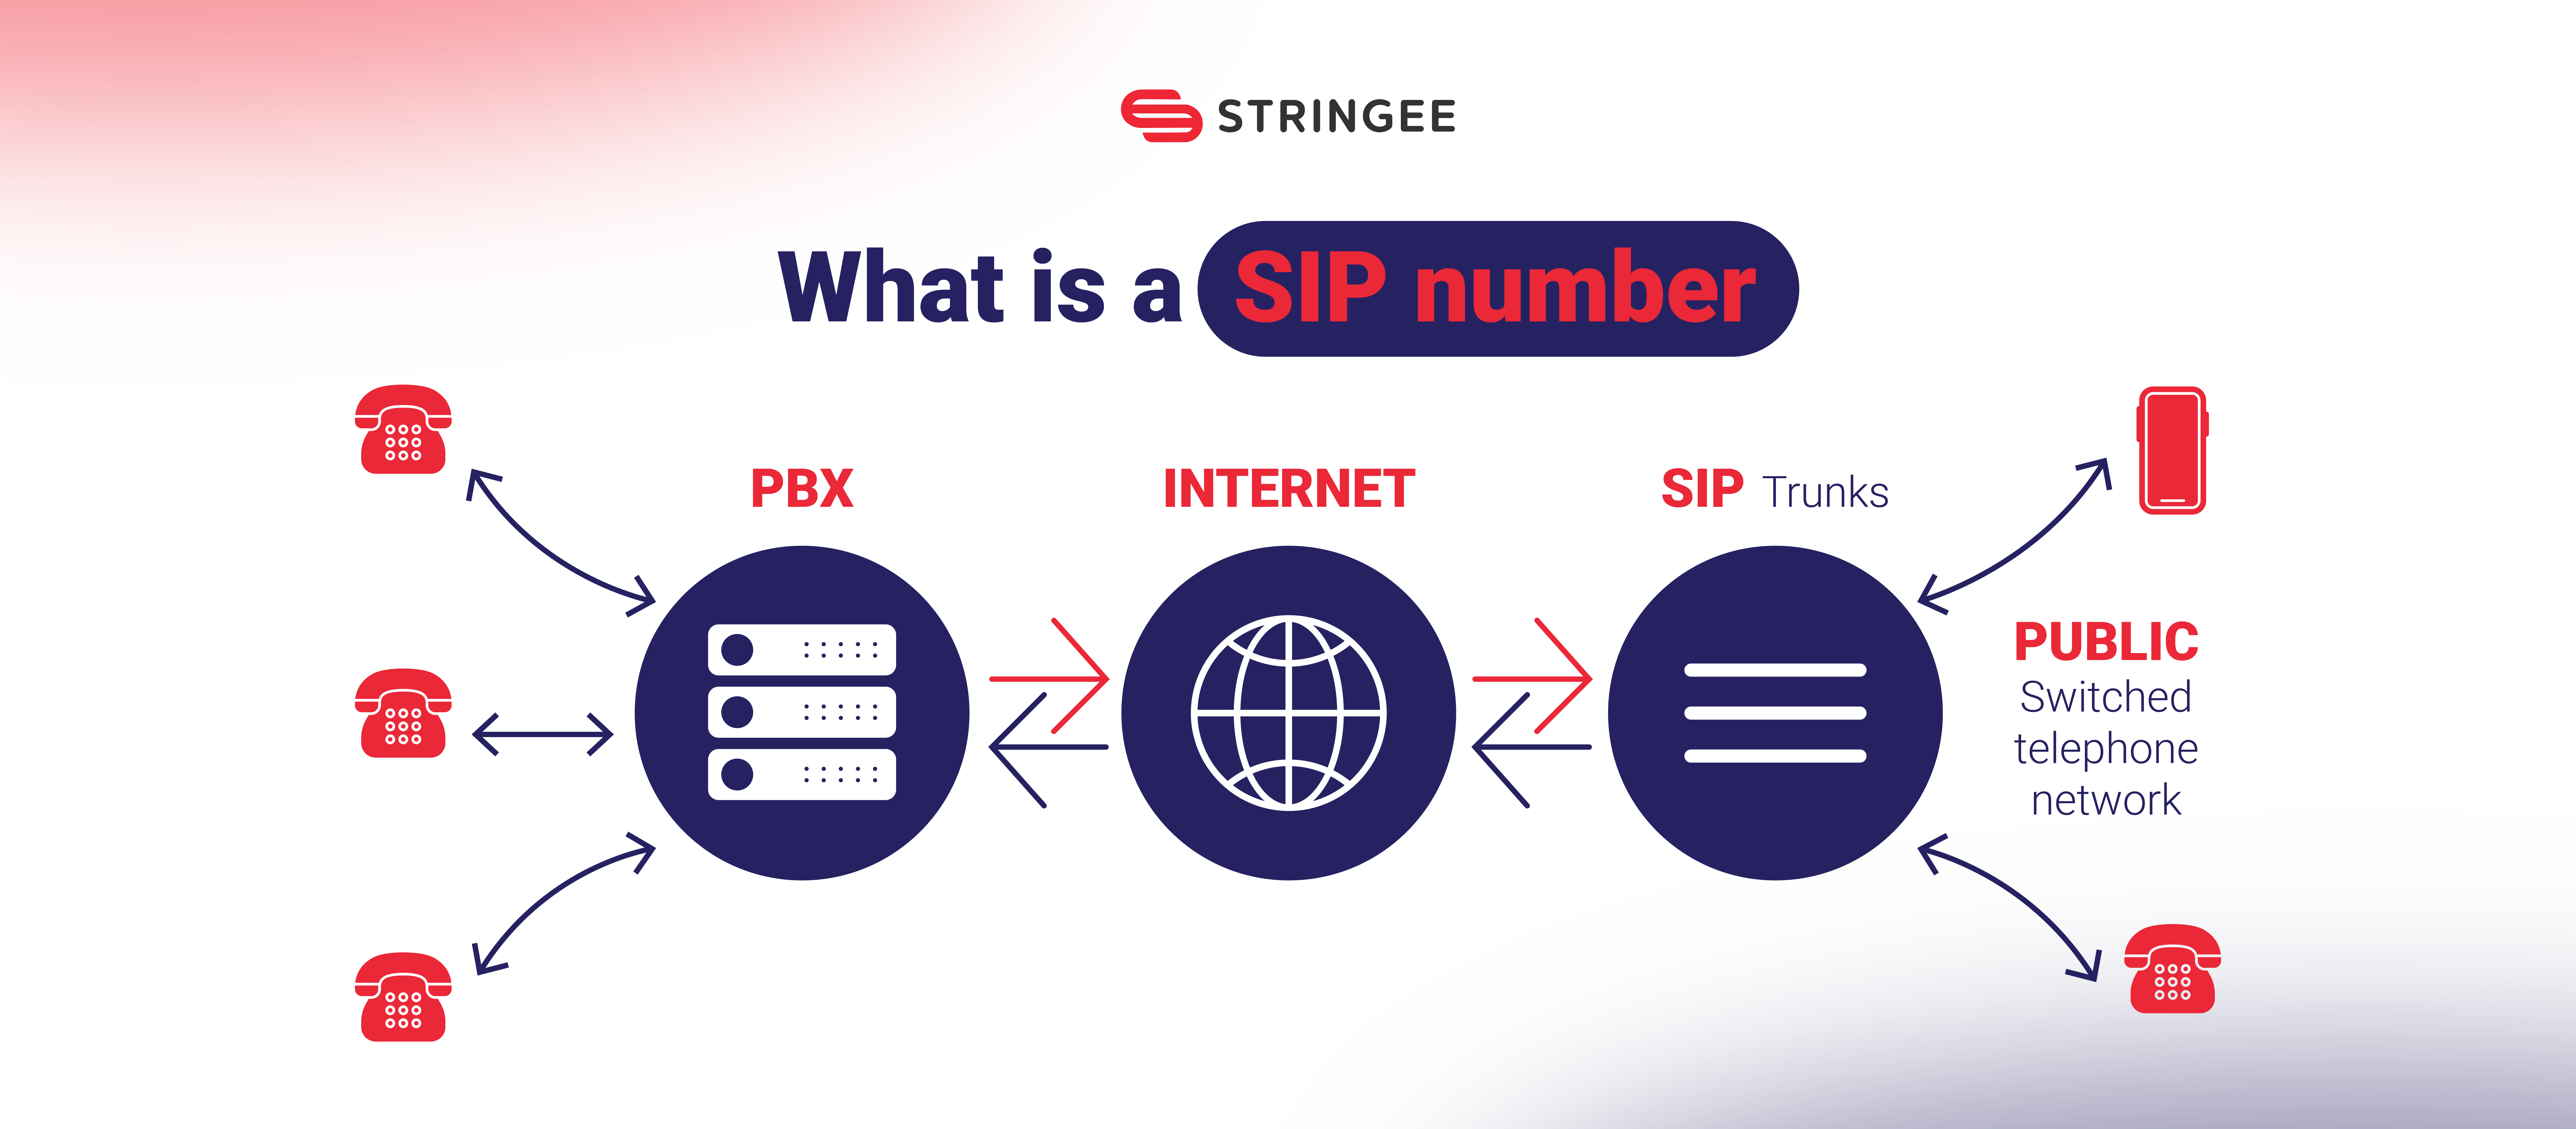 What is a SIP number